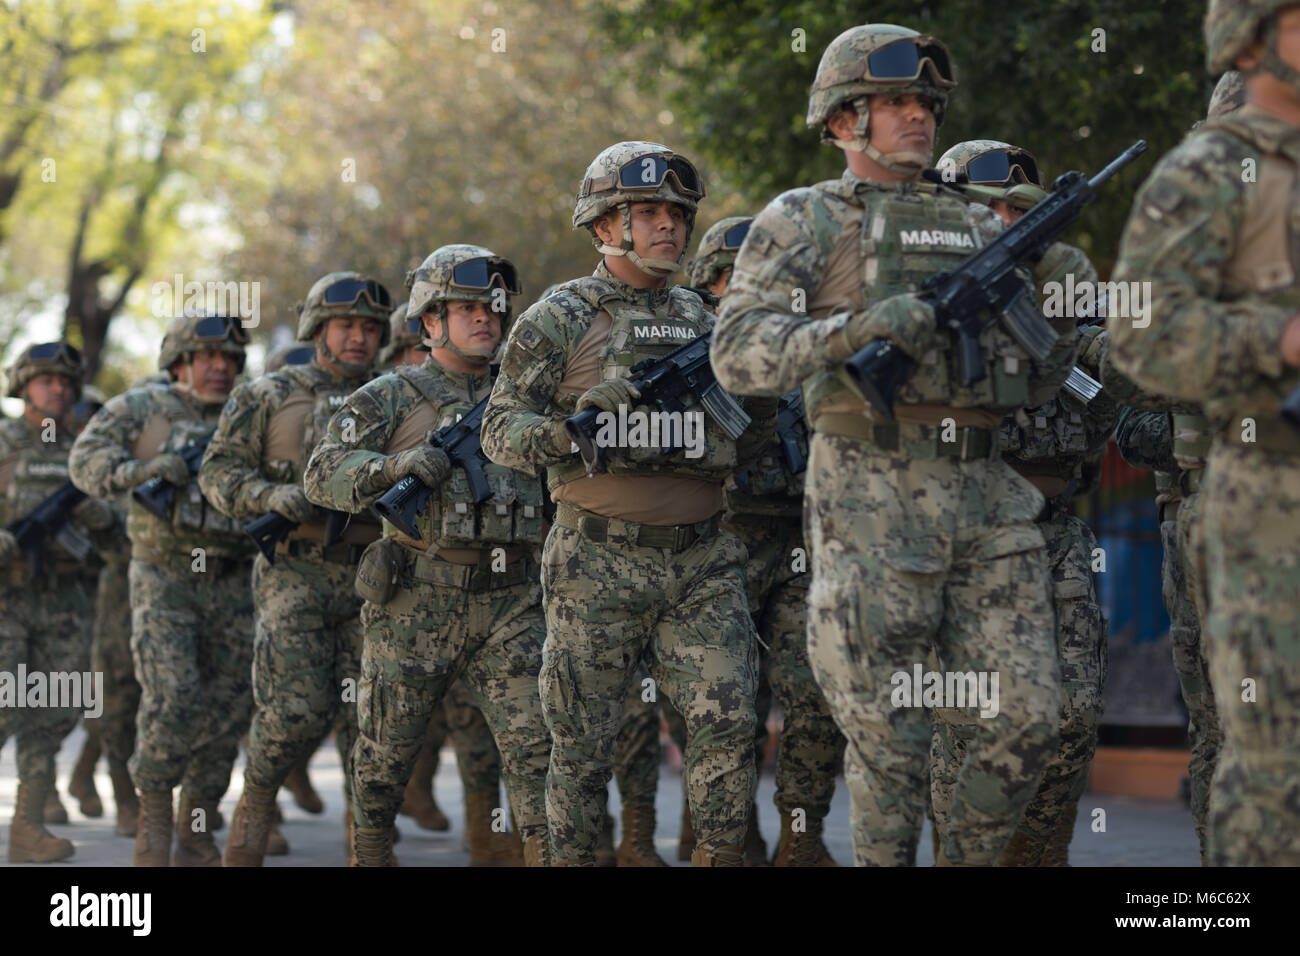 Matamoros, Tamaulipas, Mexico - February 24, 2018: Mexican armed forces during operations in north easthern Mexico. Stock Photo